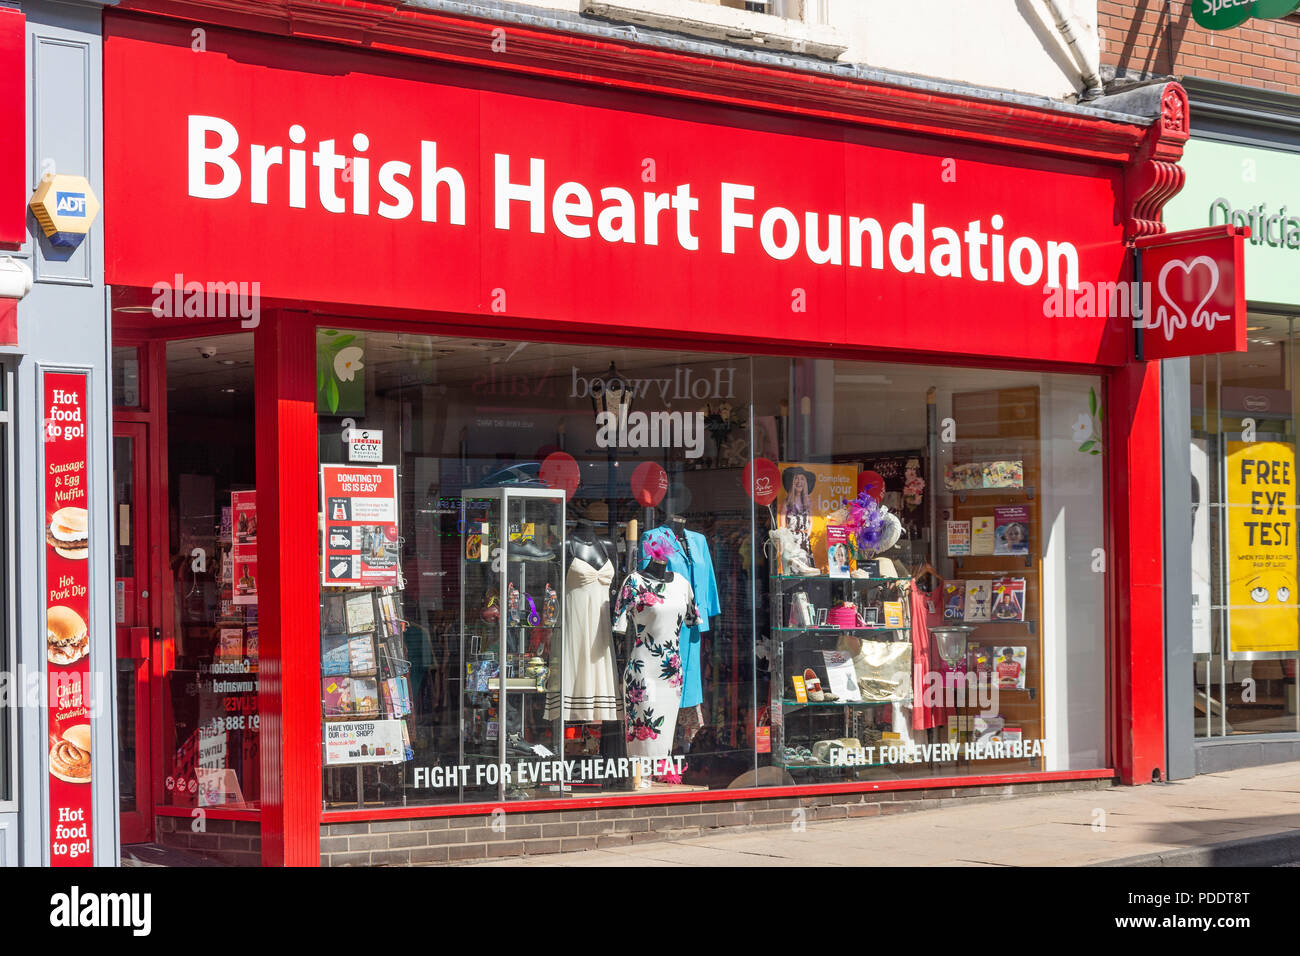 British Heart Foundation charity shop, Front Street, Chester-le-Street, County Durham, England, United Kingdom Banque D'Images